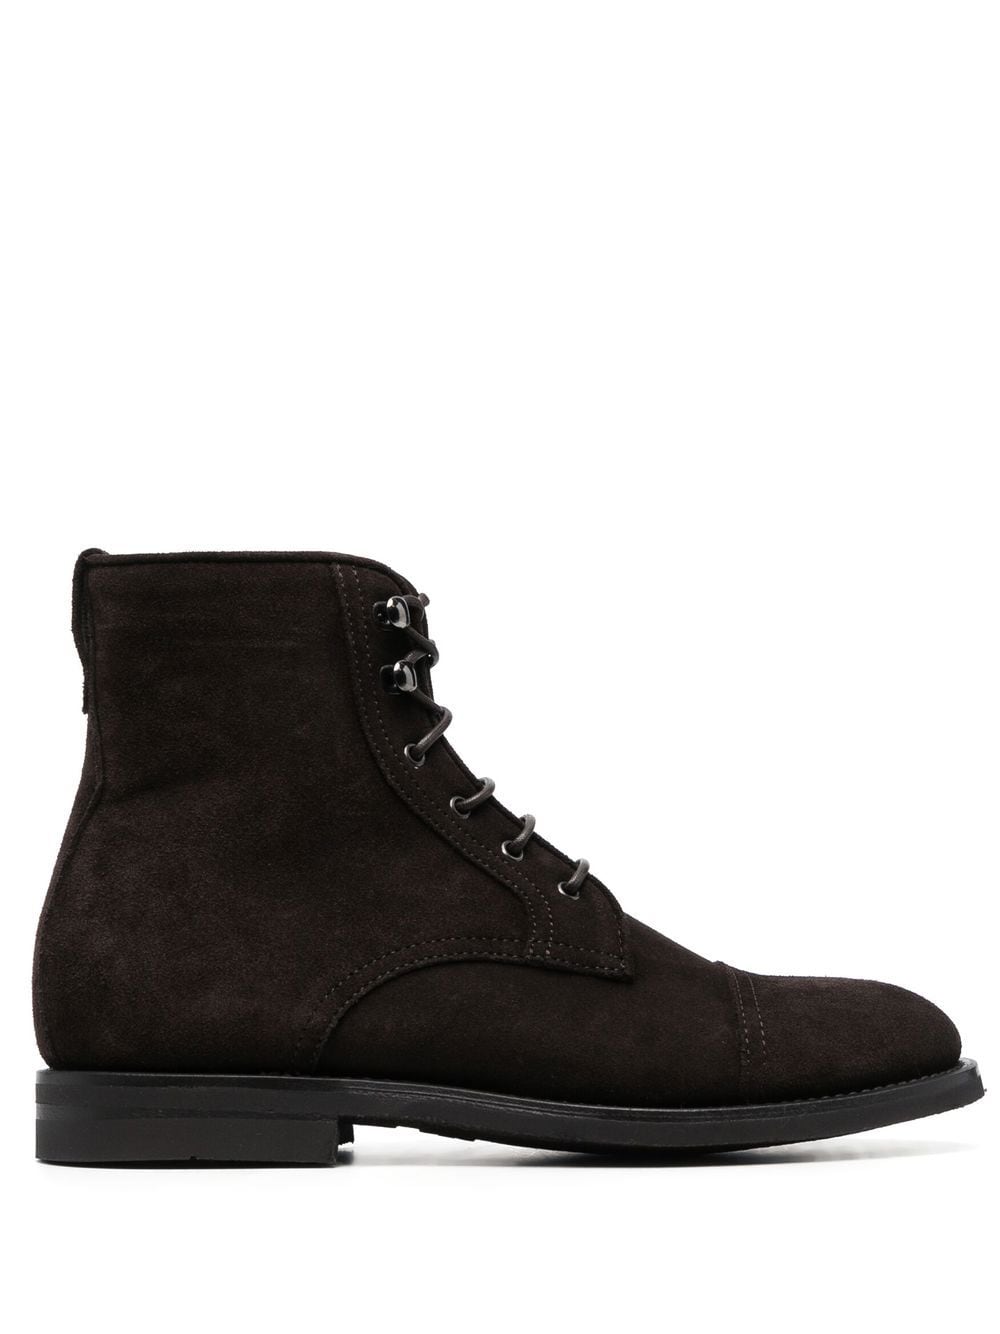 Scarosso Paola lace-up boots - Brown von Scarosso